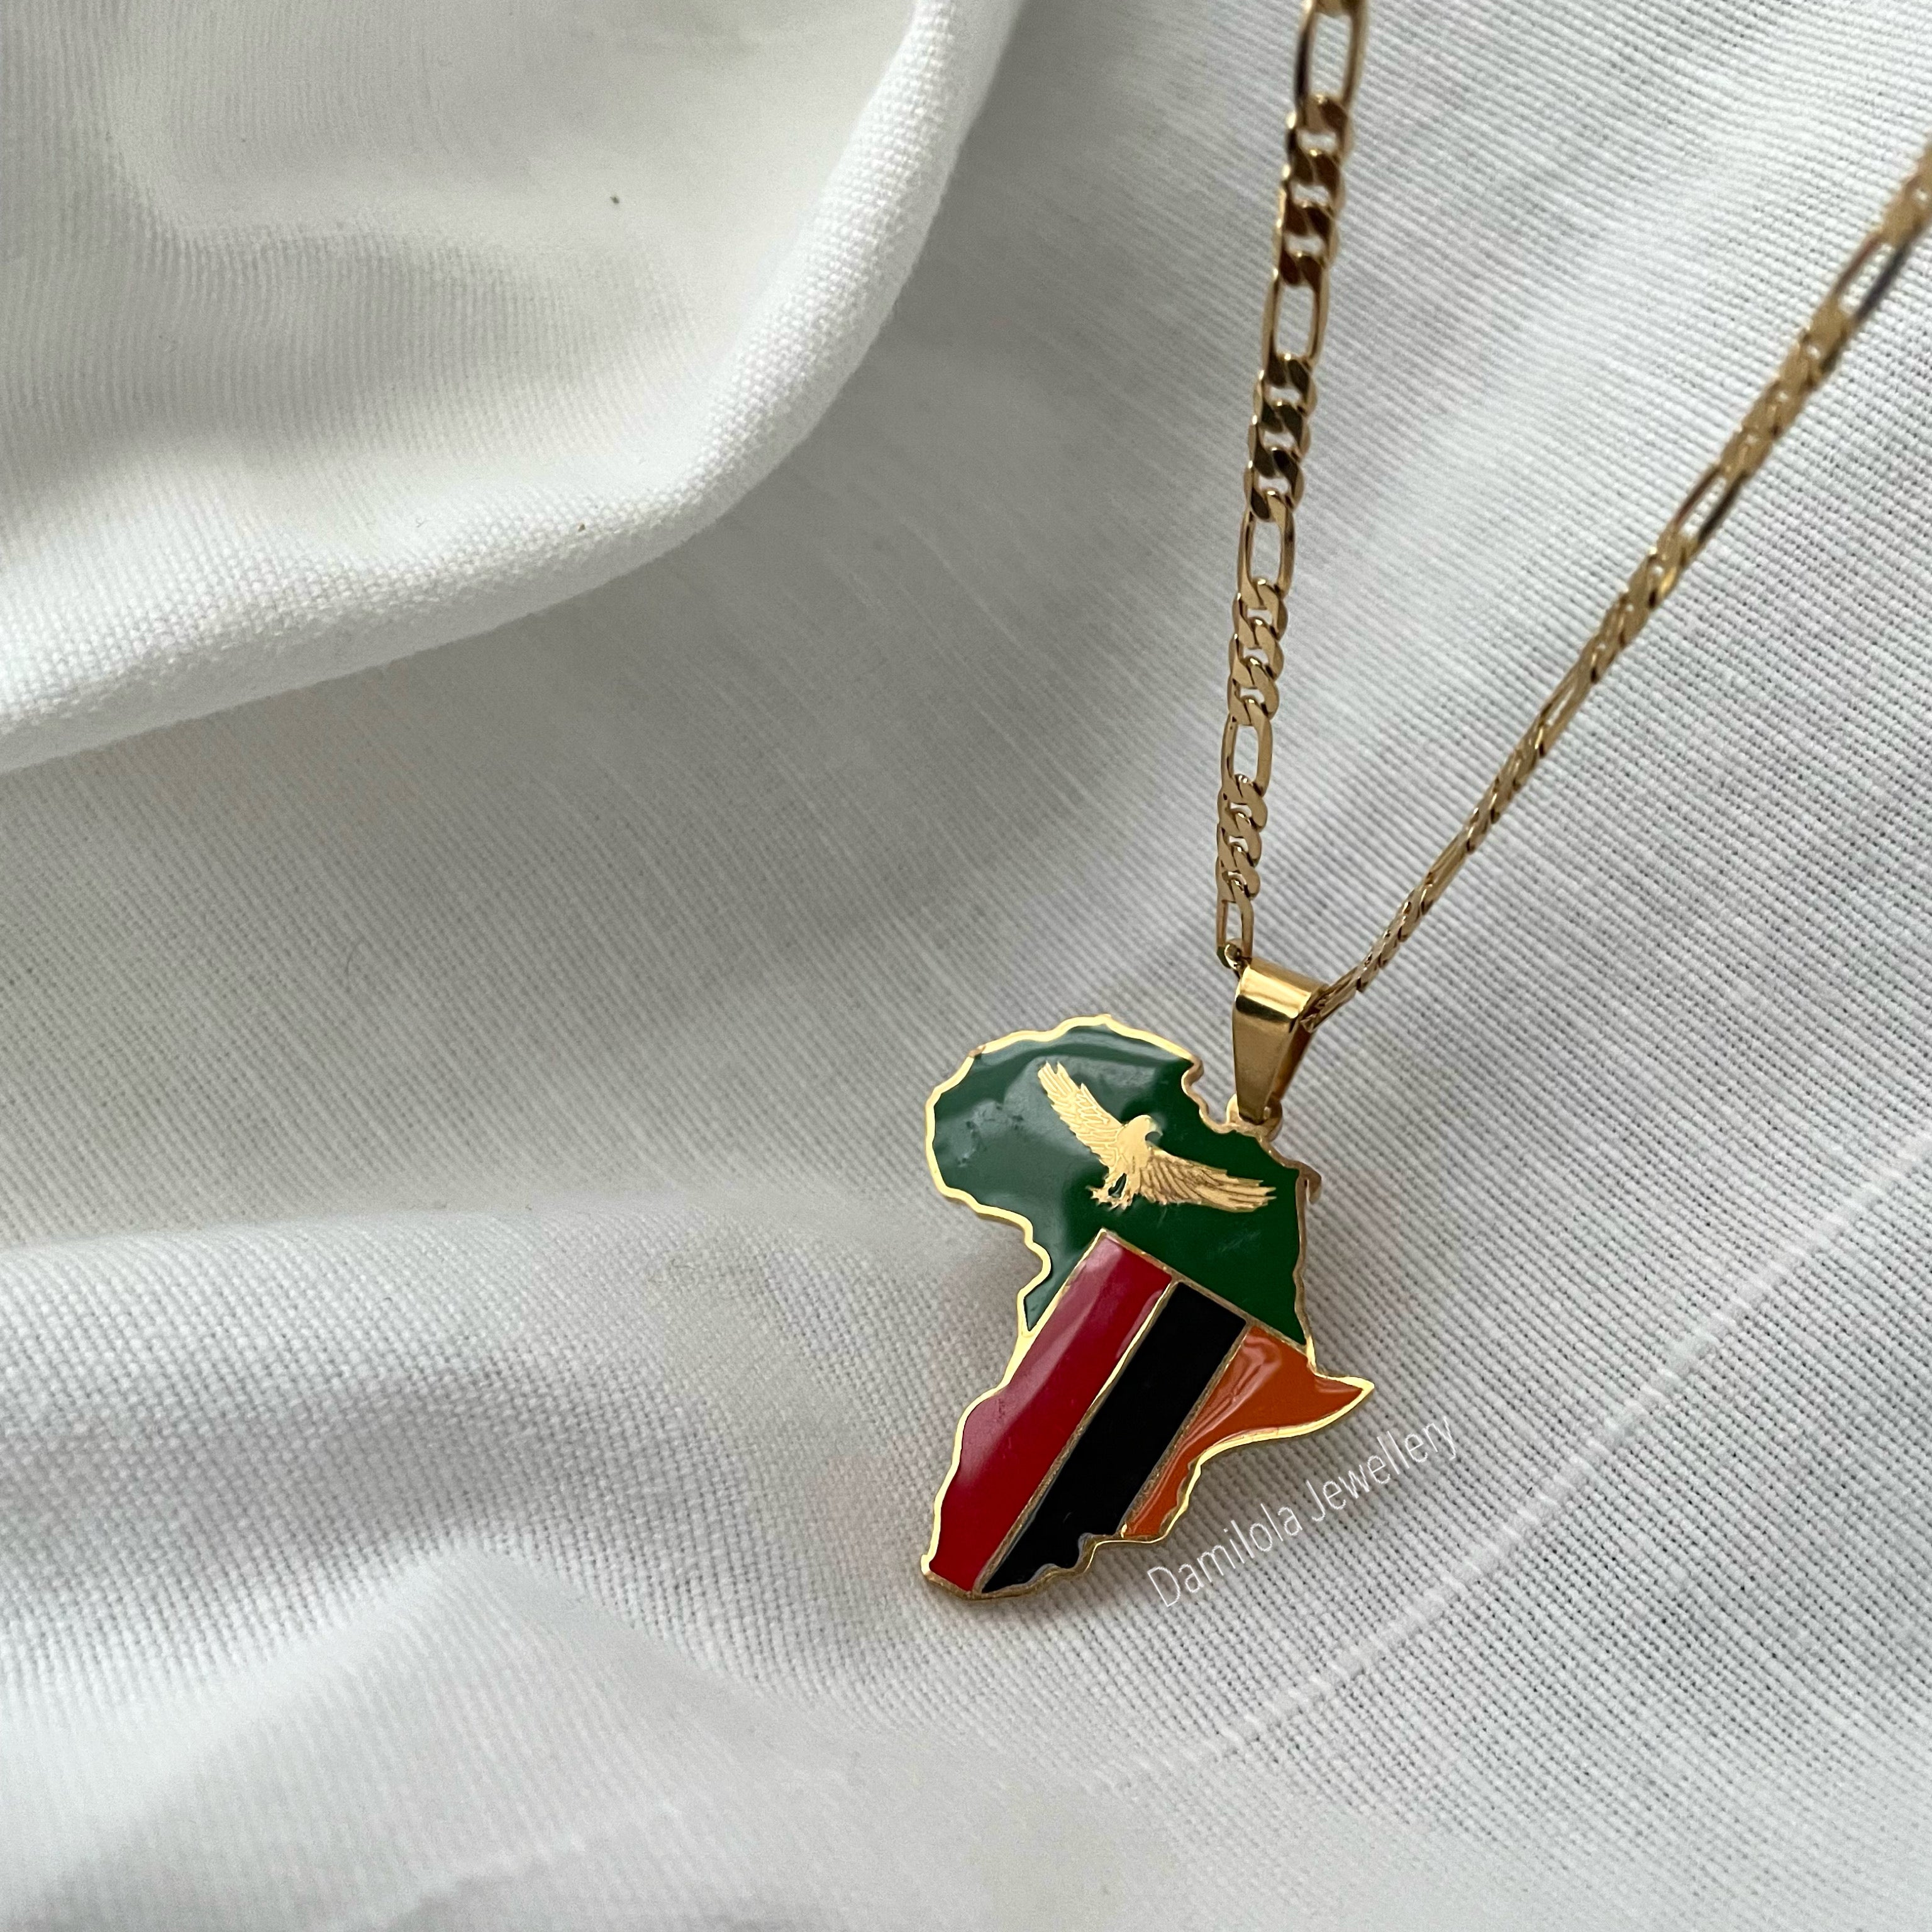 Zambia Flag Necklace 🇿🇲